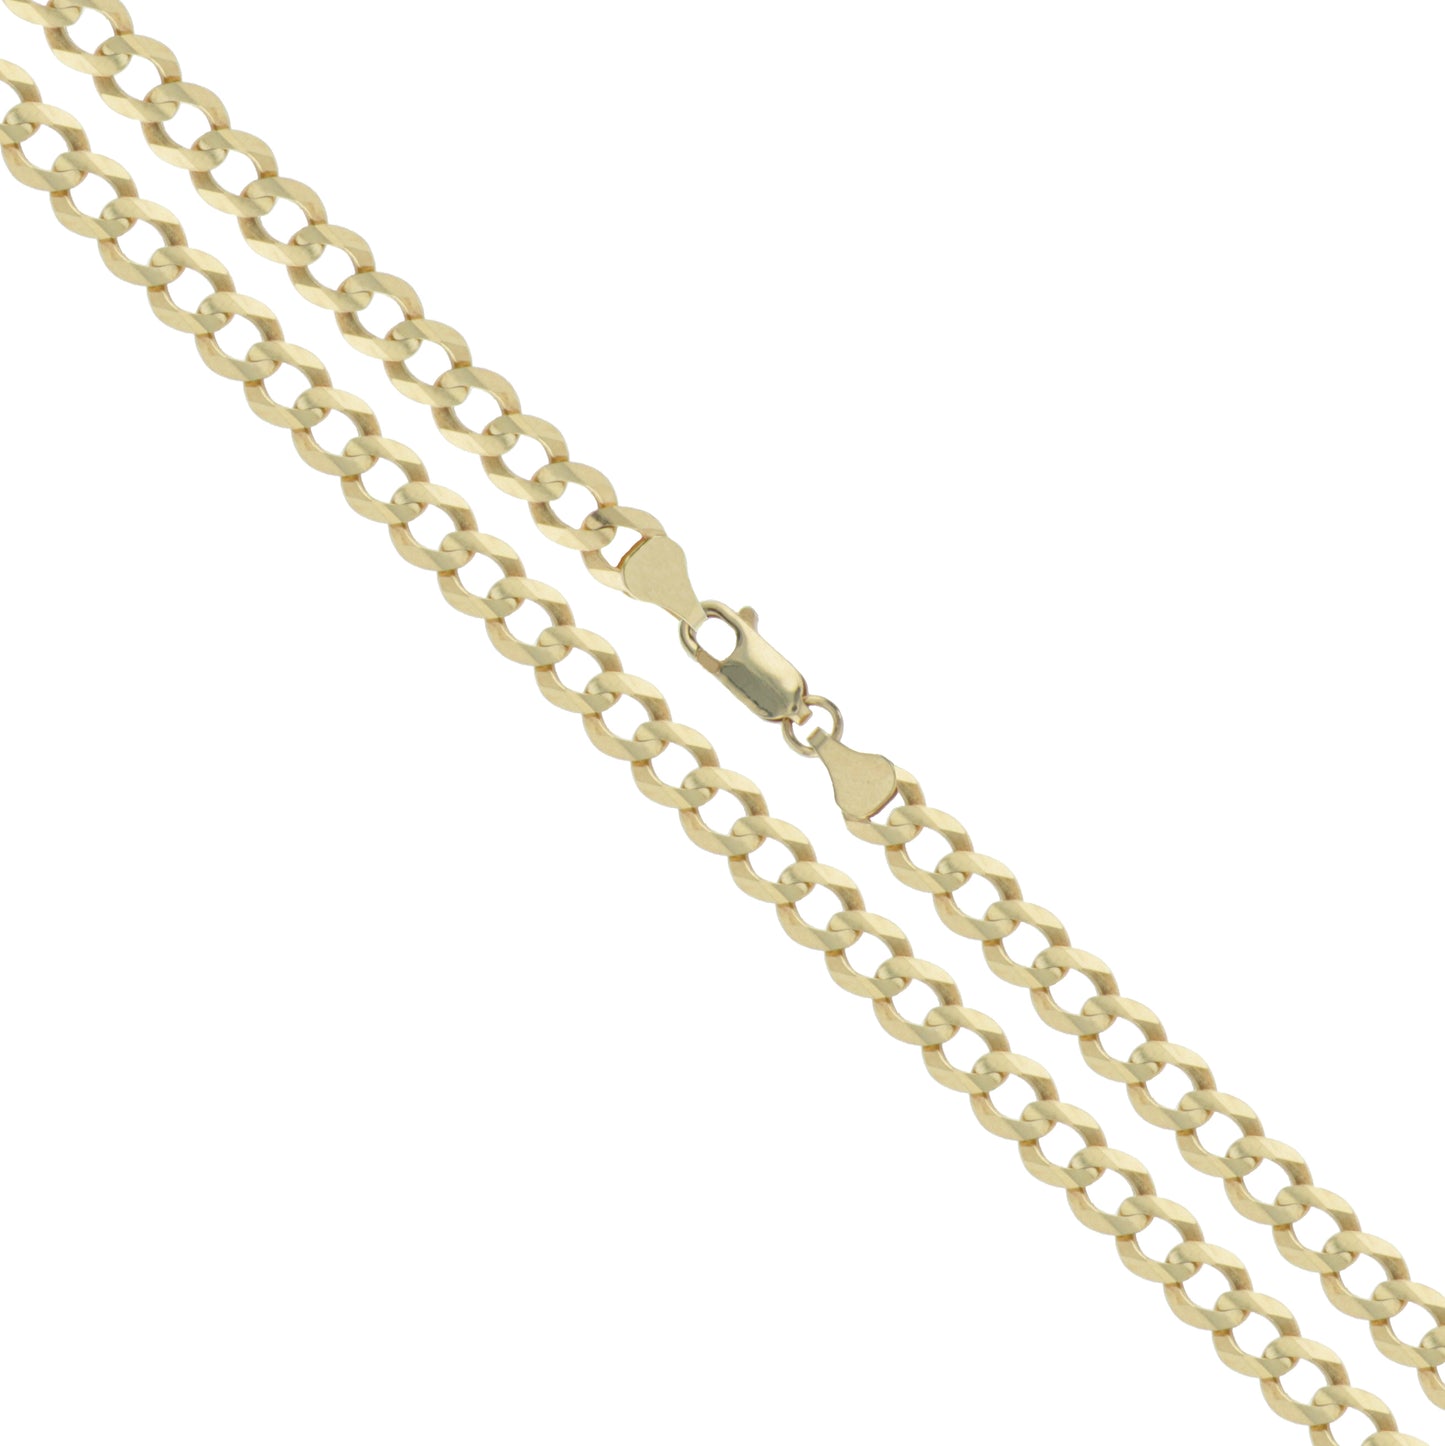 10k Yellow Gold Solid Curb Chain 3.5mm Link Necklace